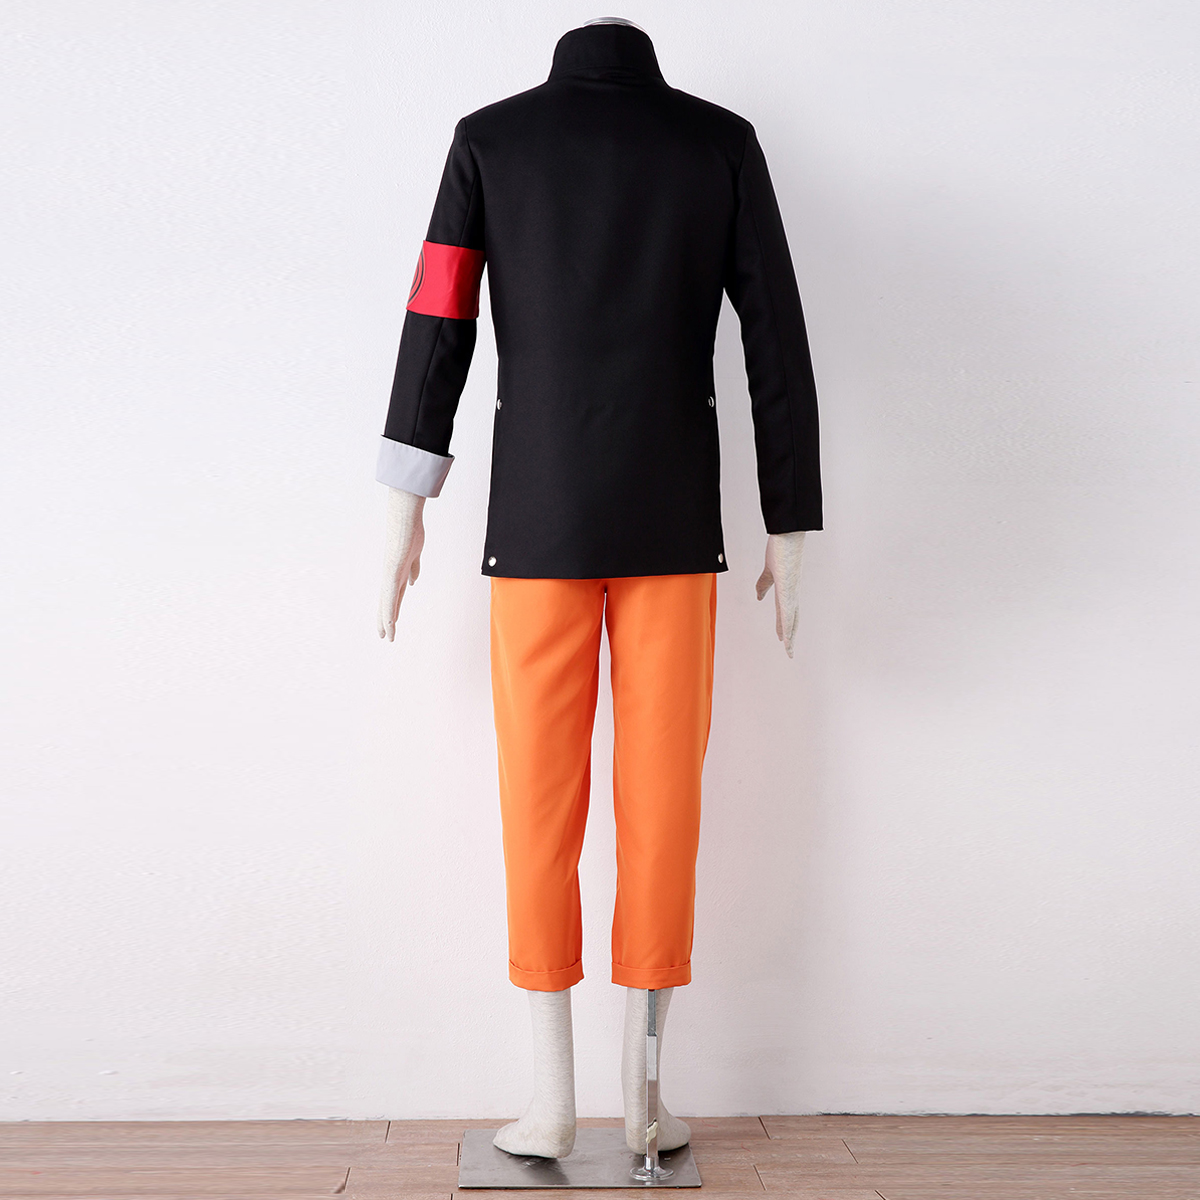 Naruto The Last Naruto 8 Anime Cosplay Costumes Outfit